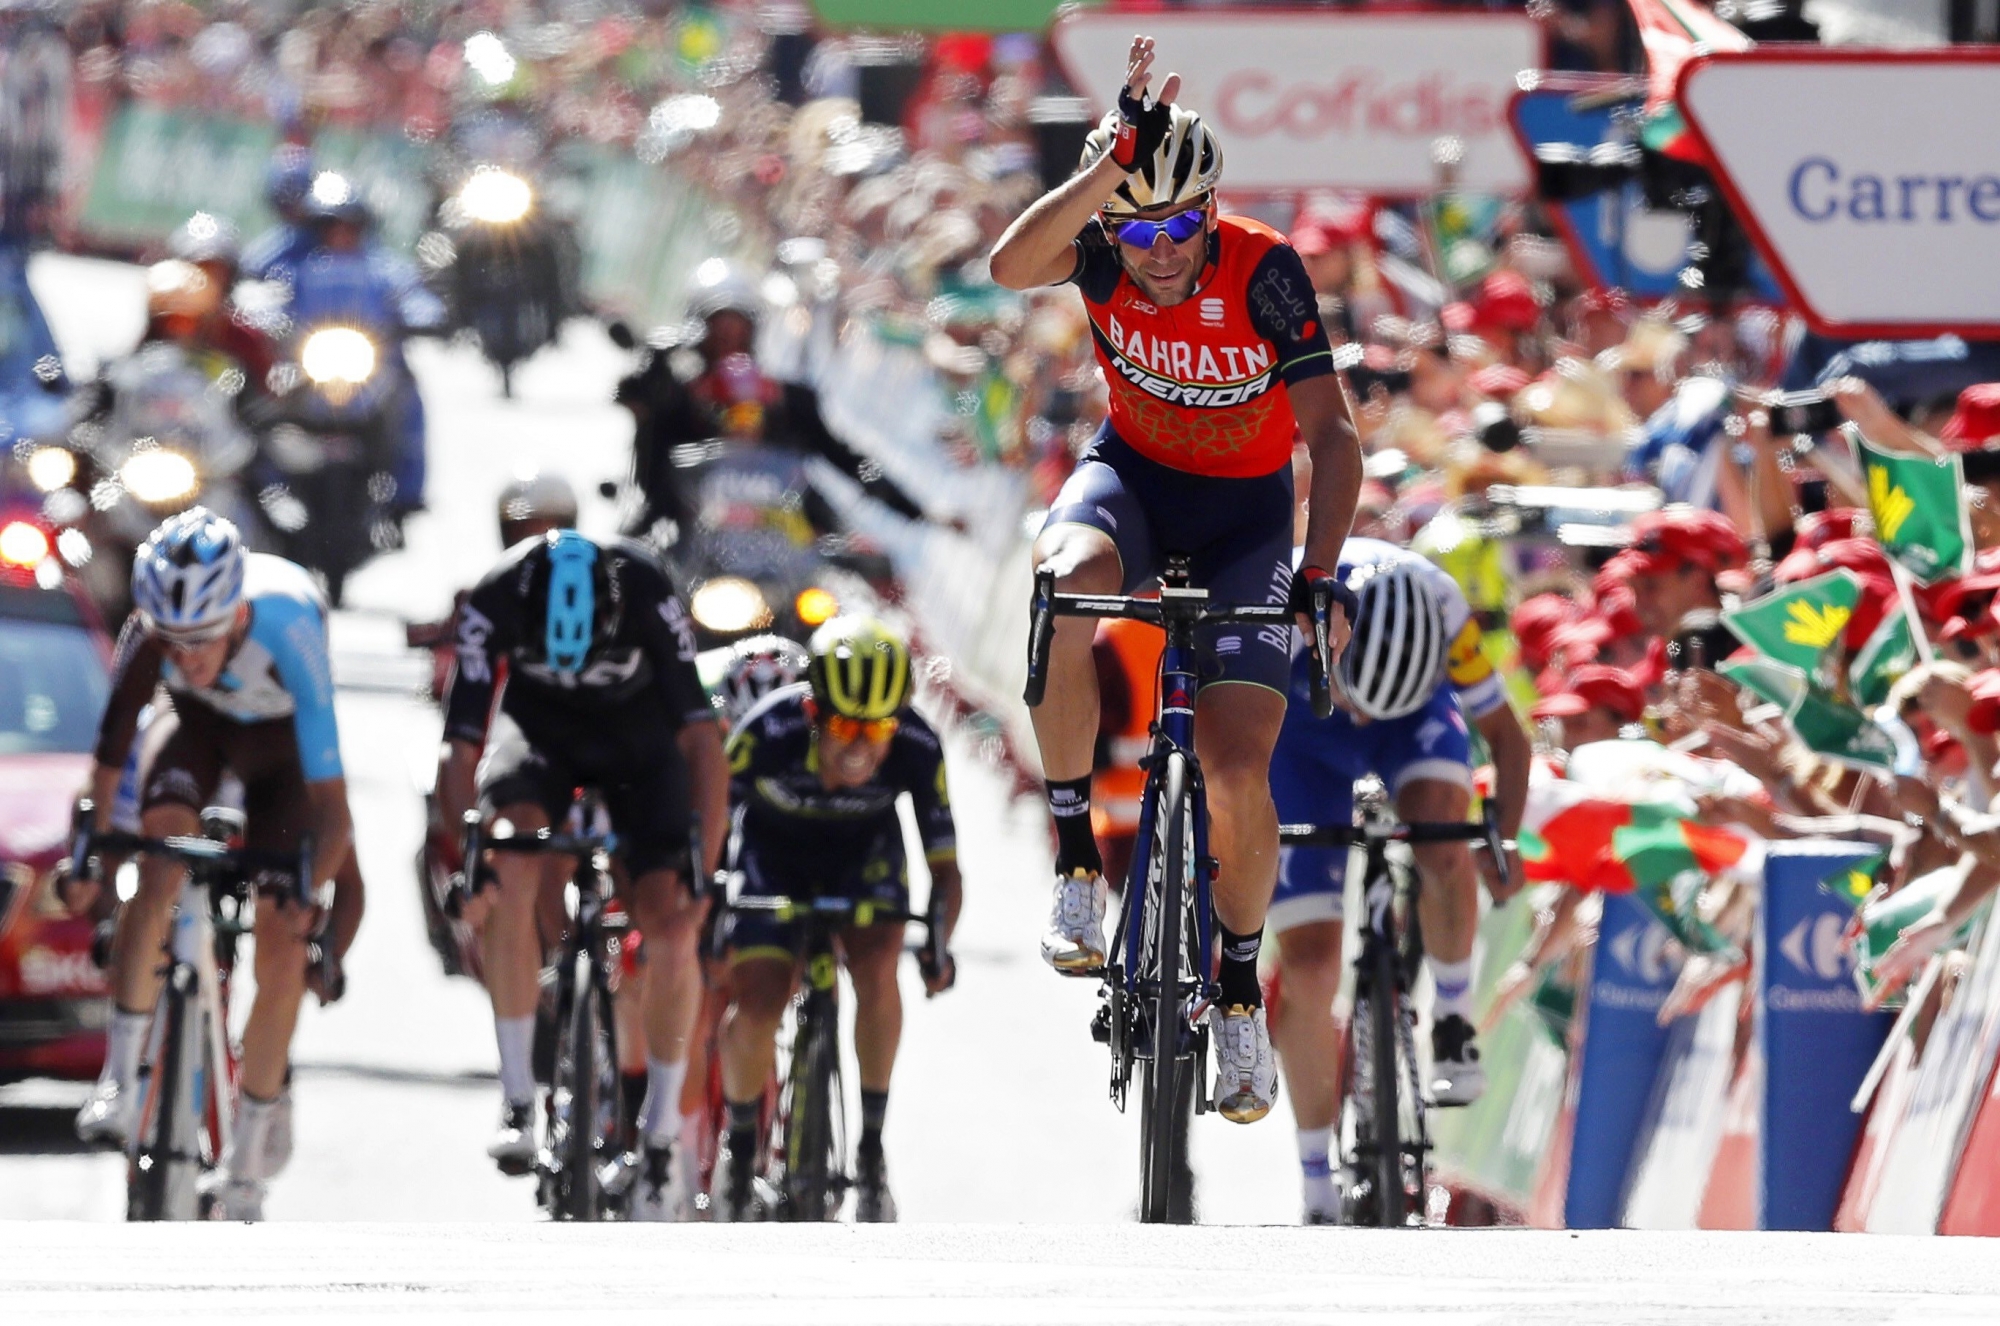 epa06154859 Italian rider Vincenzo Nibali (C) of the Bahrain Merida team celebrates as he crosses the finish line to win the third stage of the Vuelta a Espana cycling race over 158.5km from Prades Conflent Canigo, France, to Andorra la Vella, 21 August 2017.  EPA/JAVIER LIZON ANDORRA CYCLING VUELTA A ESPANA